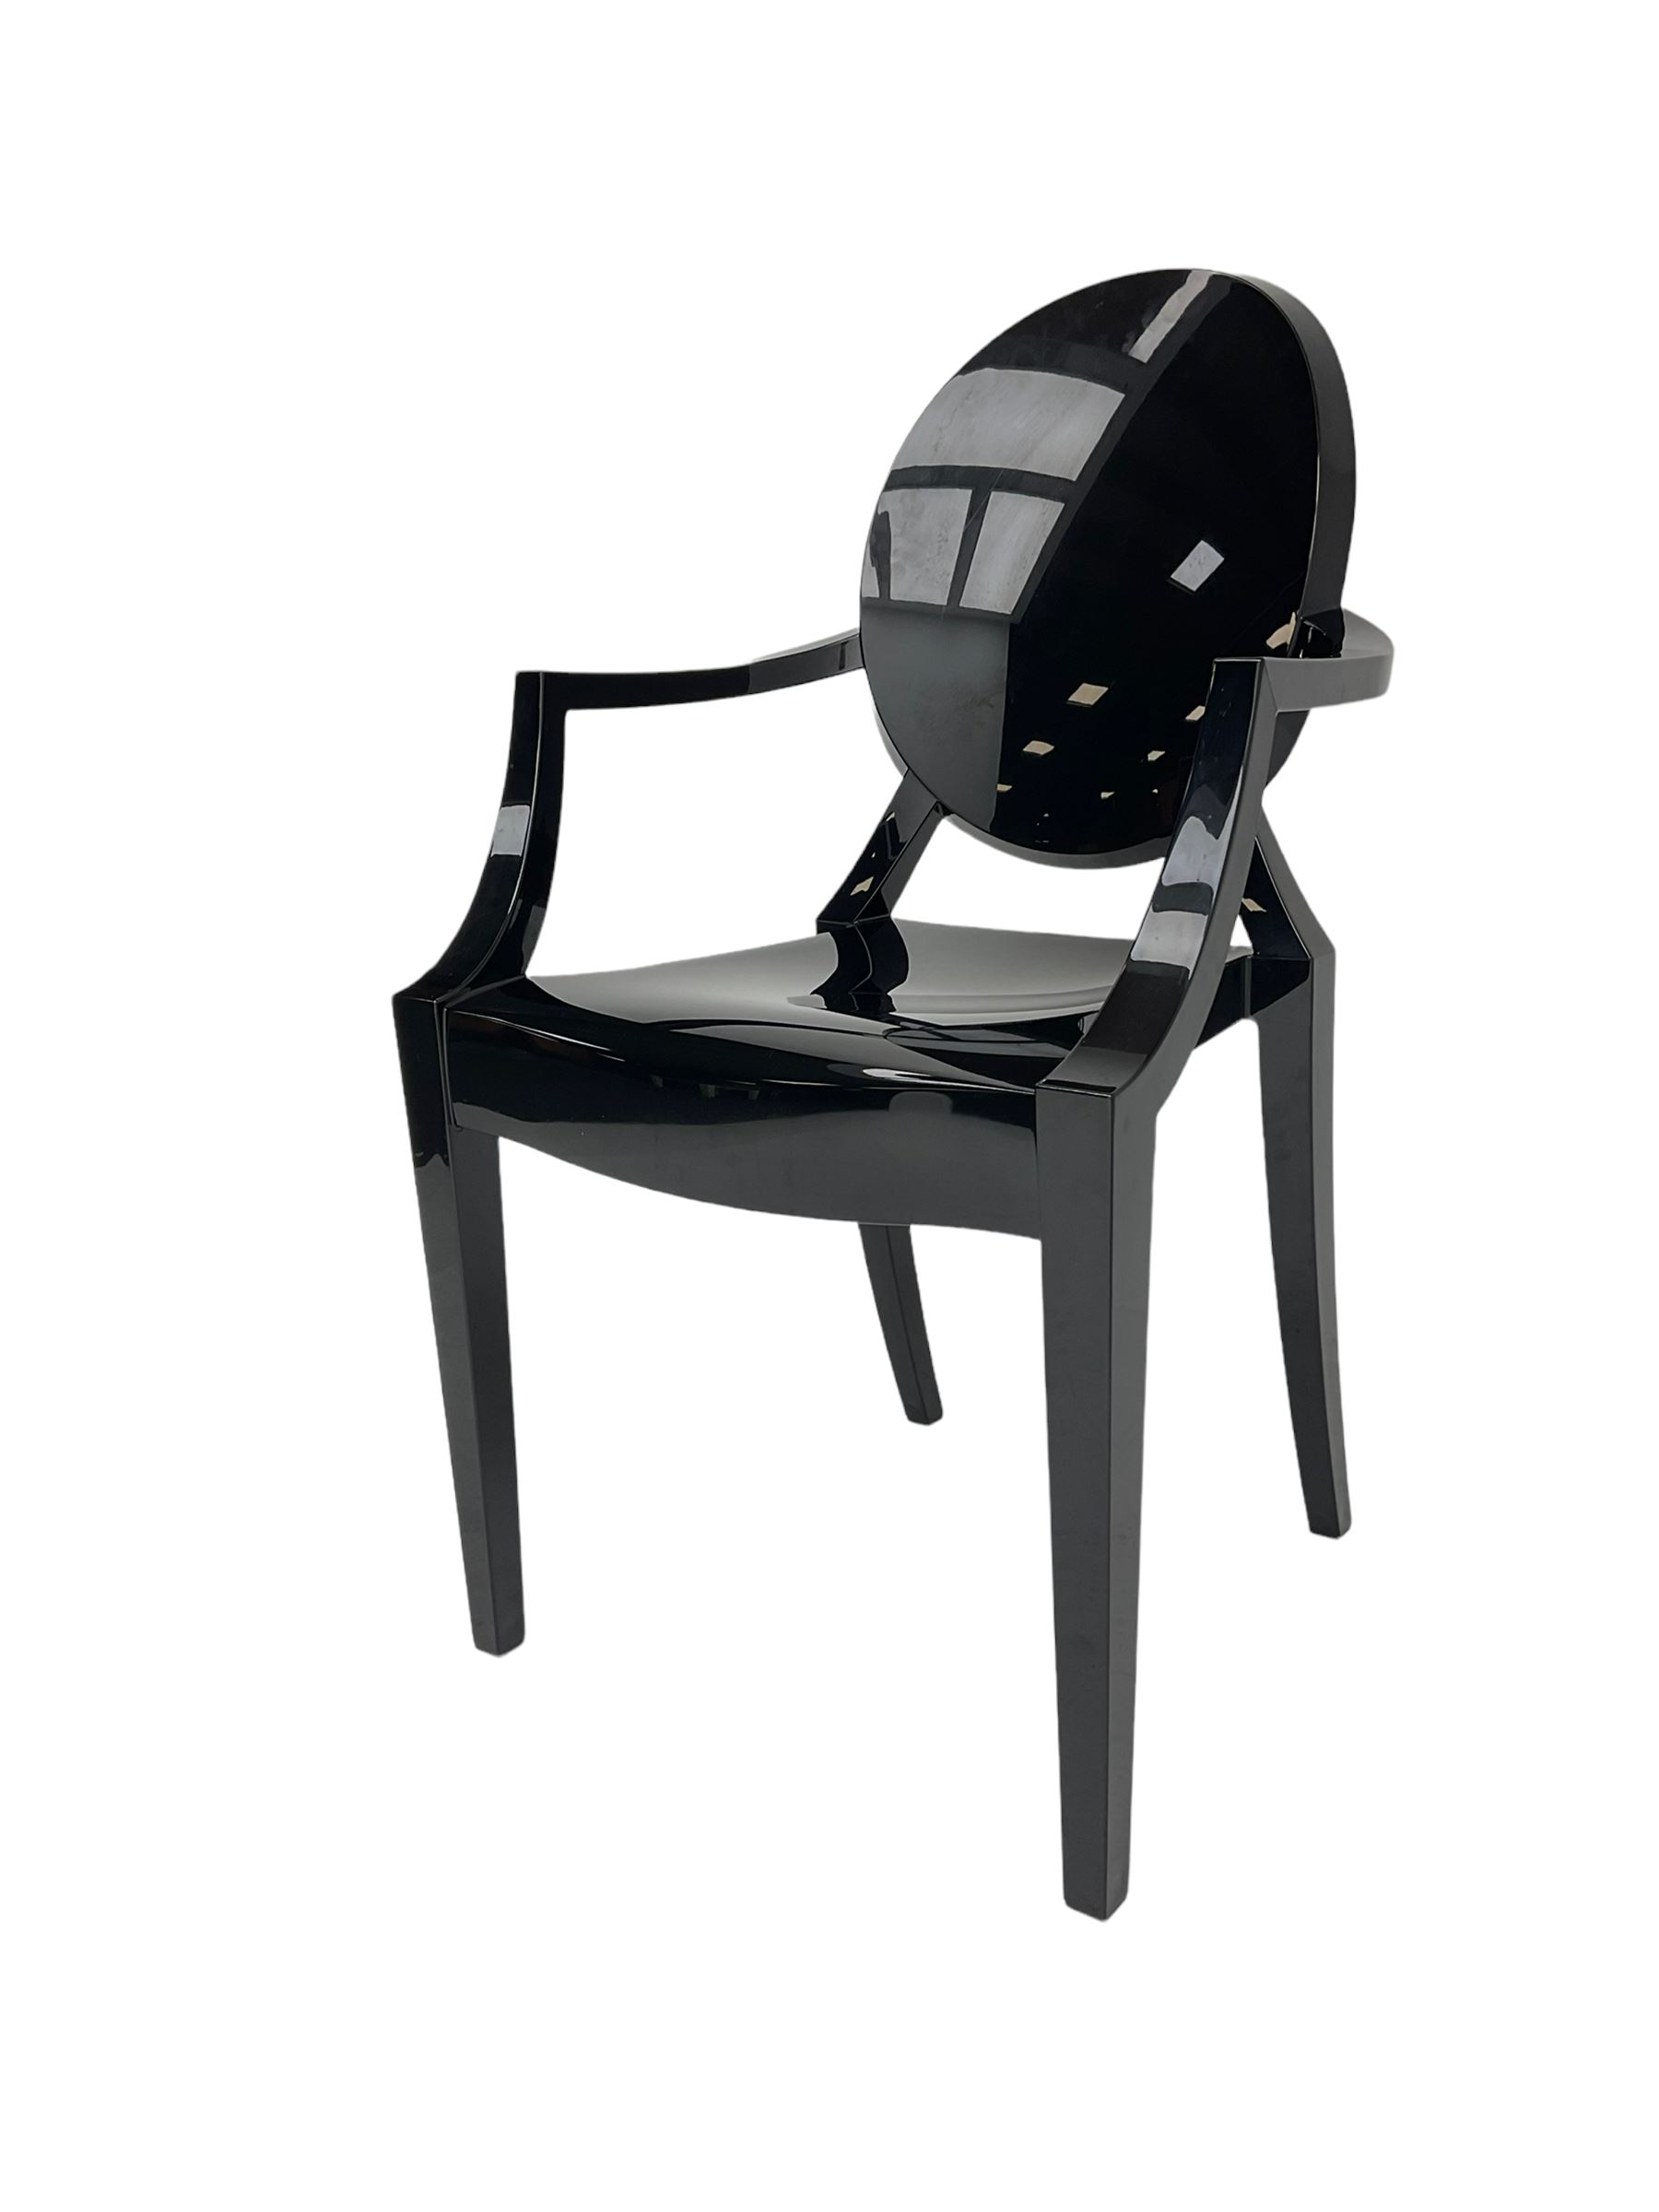 Philippe Starck for Kartell - 'Louis Ghost' chair - Image 6 of 6